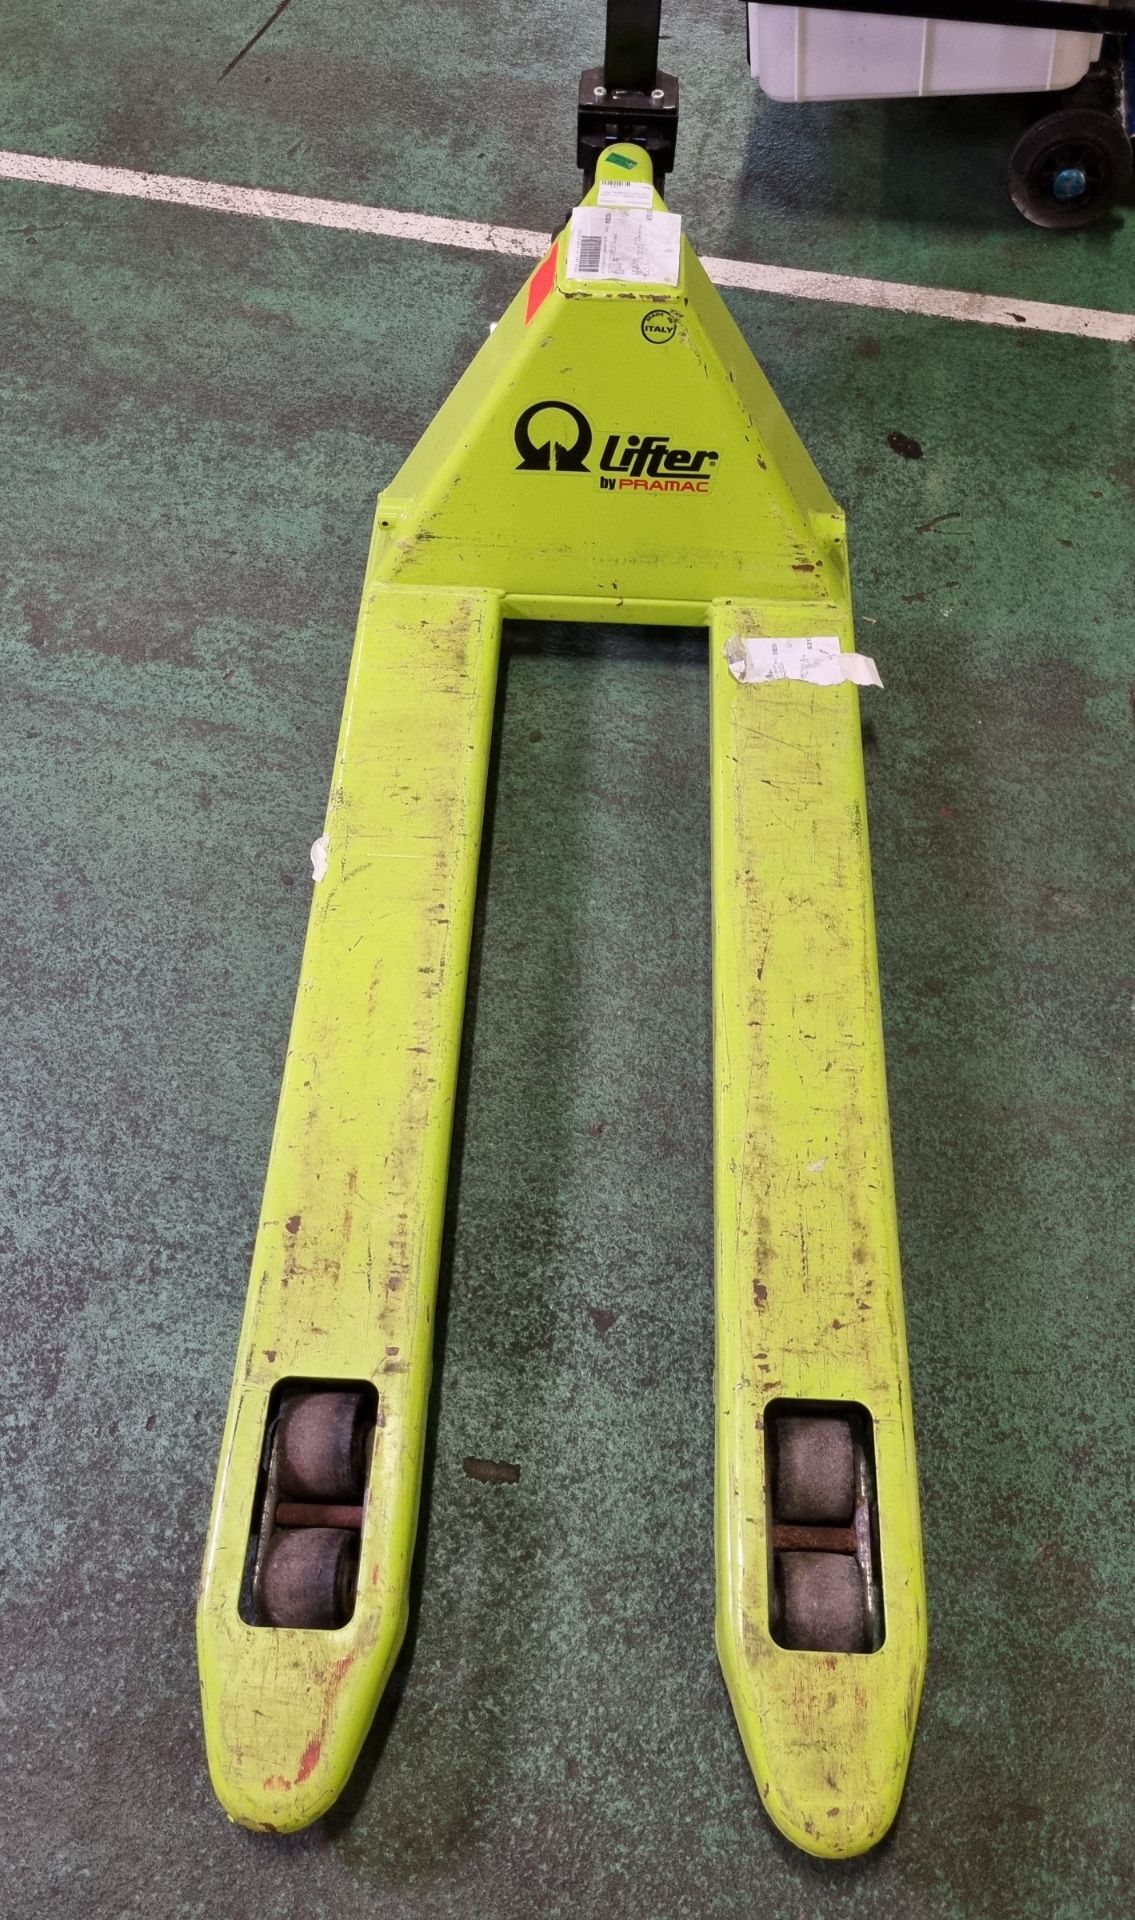 Lifter GS/BASIC 22S4 hand pallet truck - capacity: 2200kg - Image 3 of 4